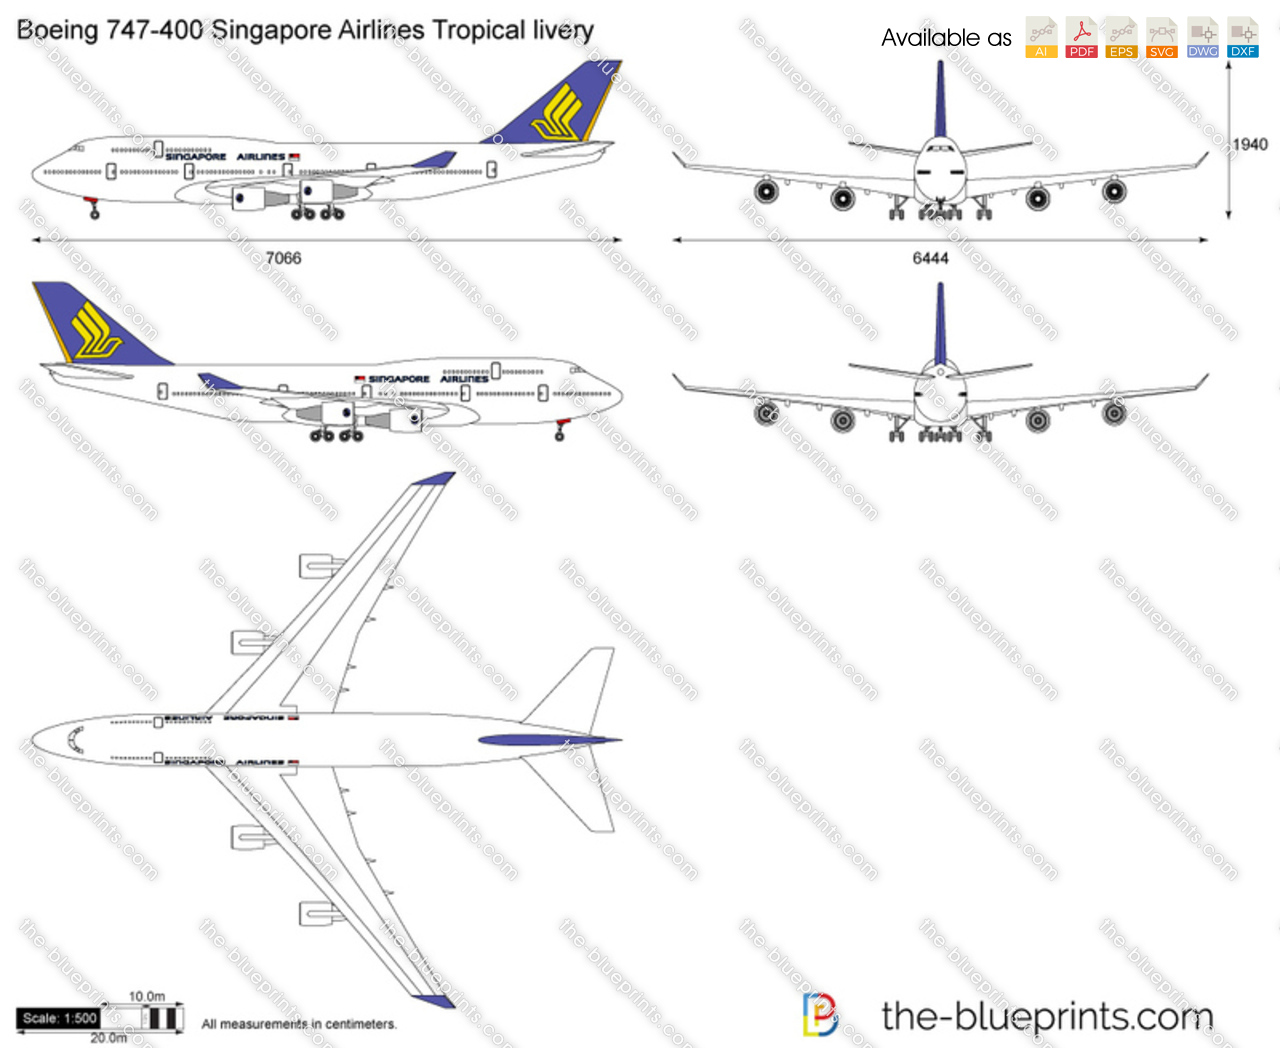 Boeing 747-400 Singapore Airlines Tropical livery